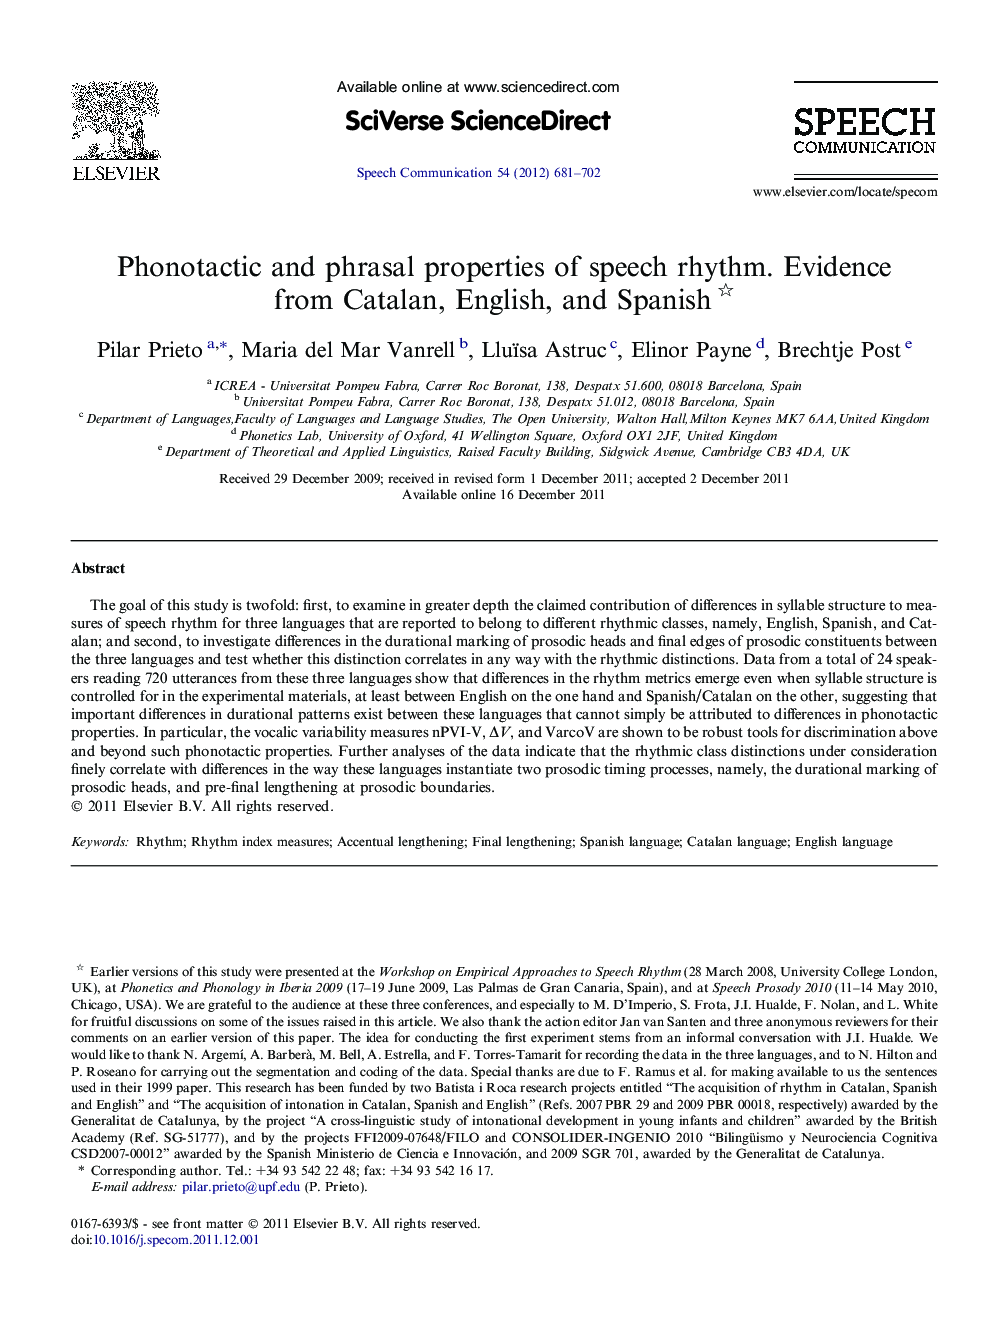 Phonotactic and phrasal properties of speech rhythm. Evidence from Catalan, English, and Spanish 